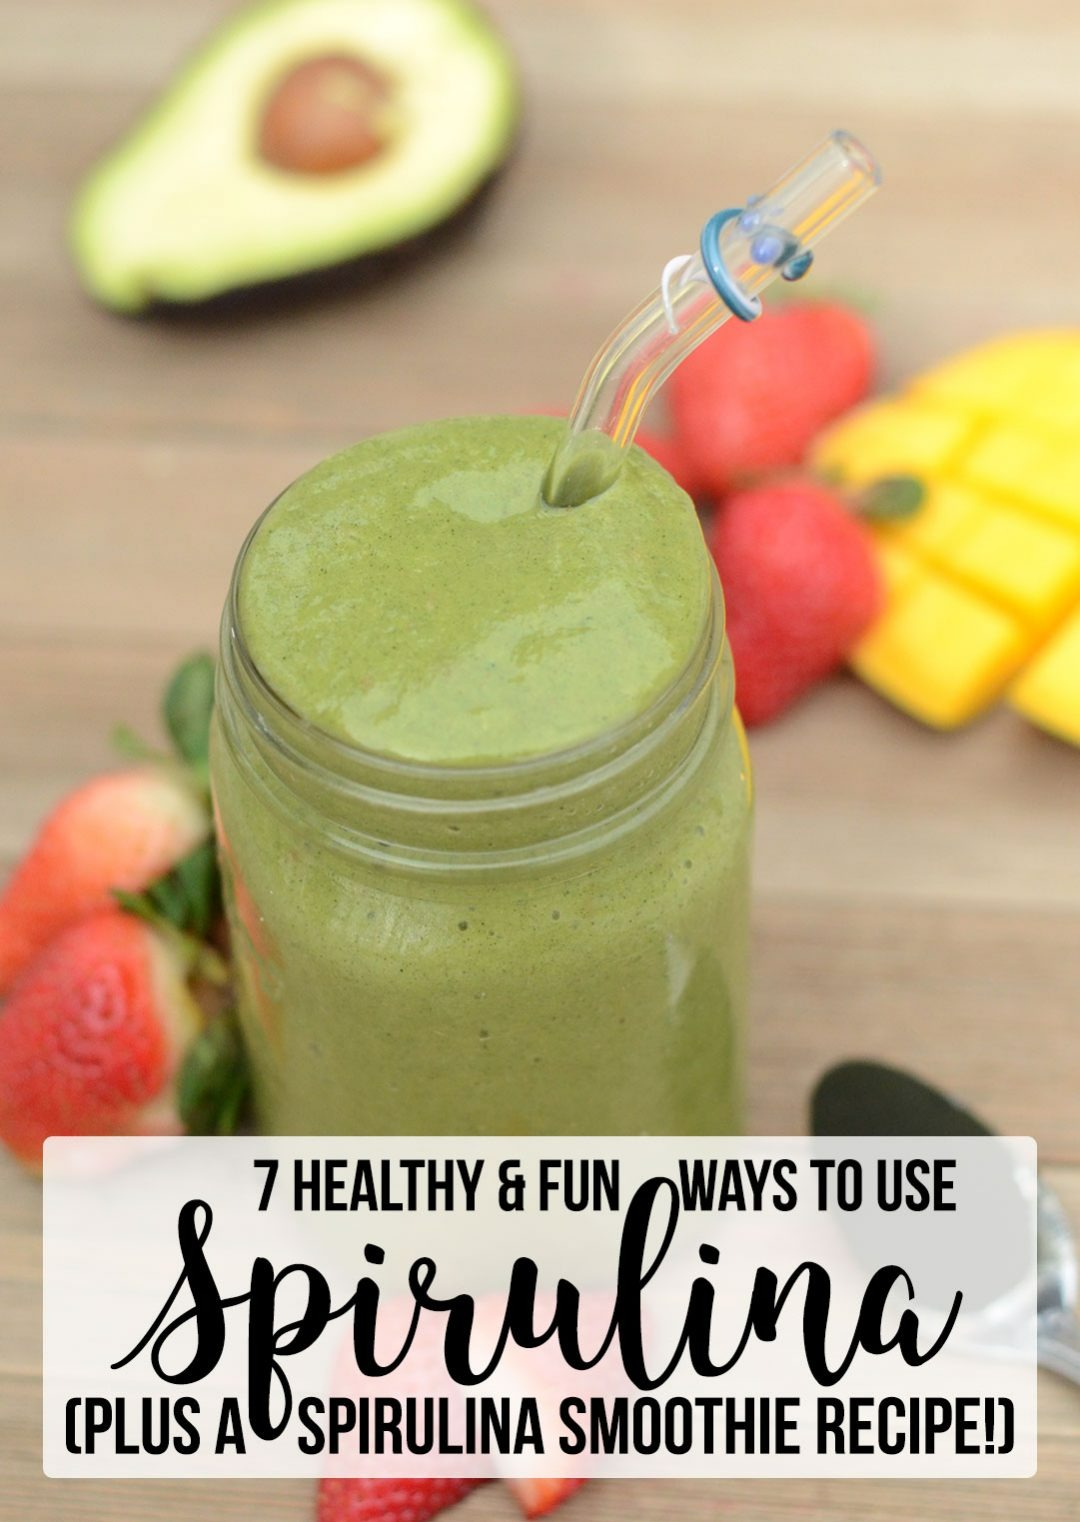 Healthy & Fun Ways To Use Spirulina (plus a spirulina smoothie recipe!) | It may be the most nutrient-dense food on the planet... but that doesn't do much good unless you know how to use it! Here are 7 nutritious and fun ways to use spirulina, including a spirulina smoothie recipe! (You're going to be shocked by #7!) | WildernessFamilyNaturals.com